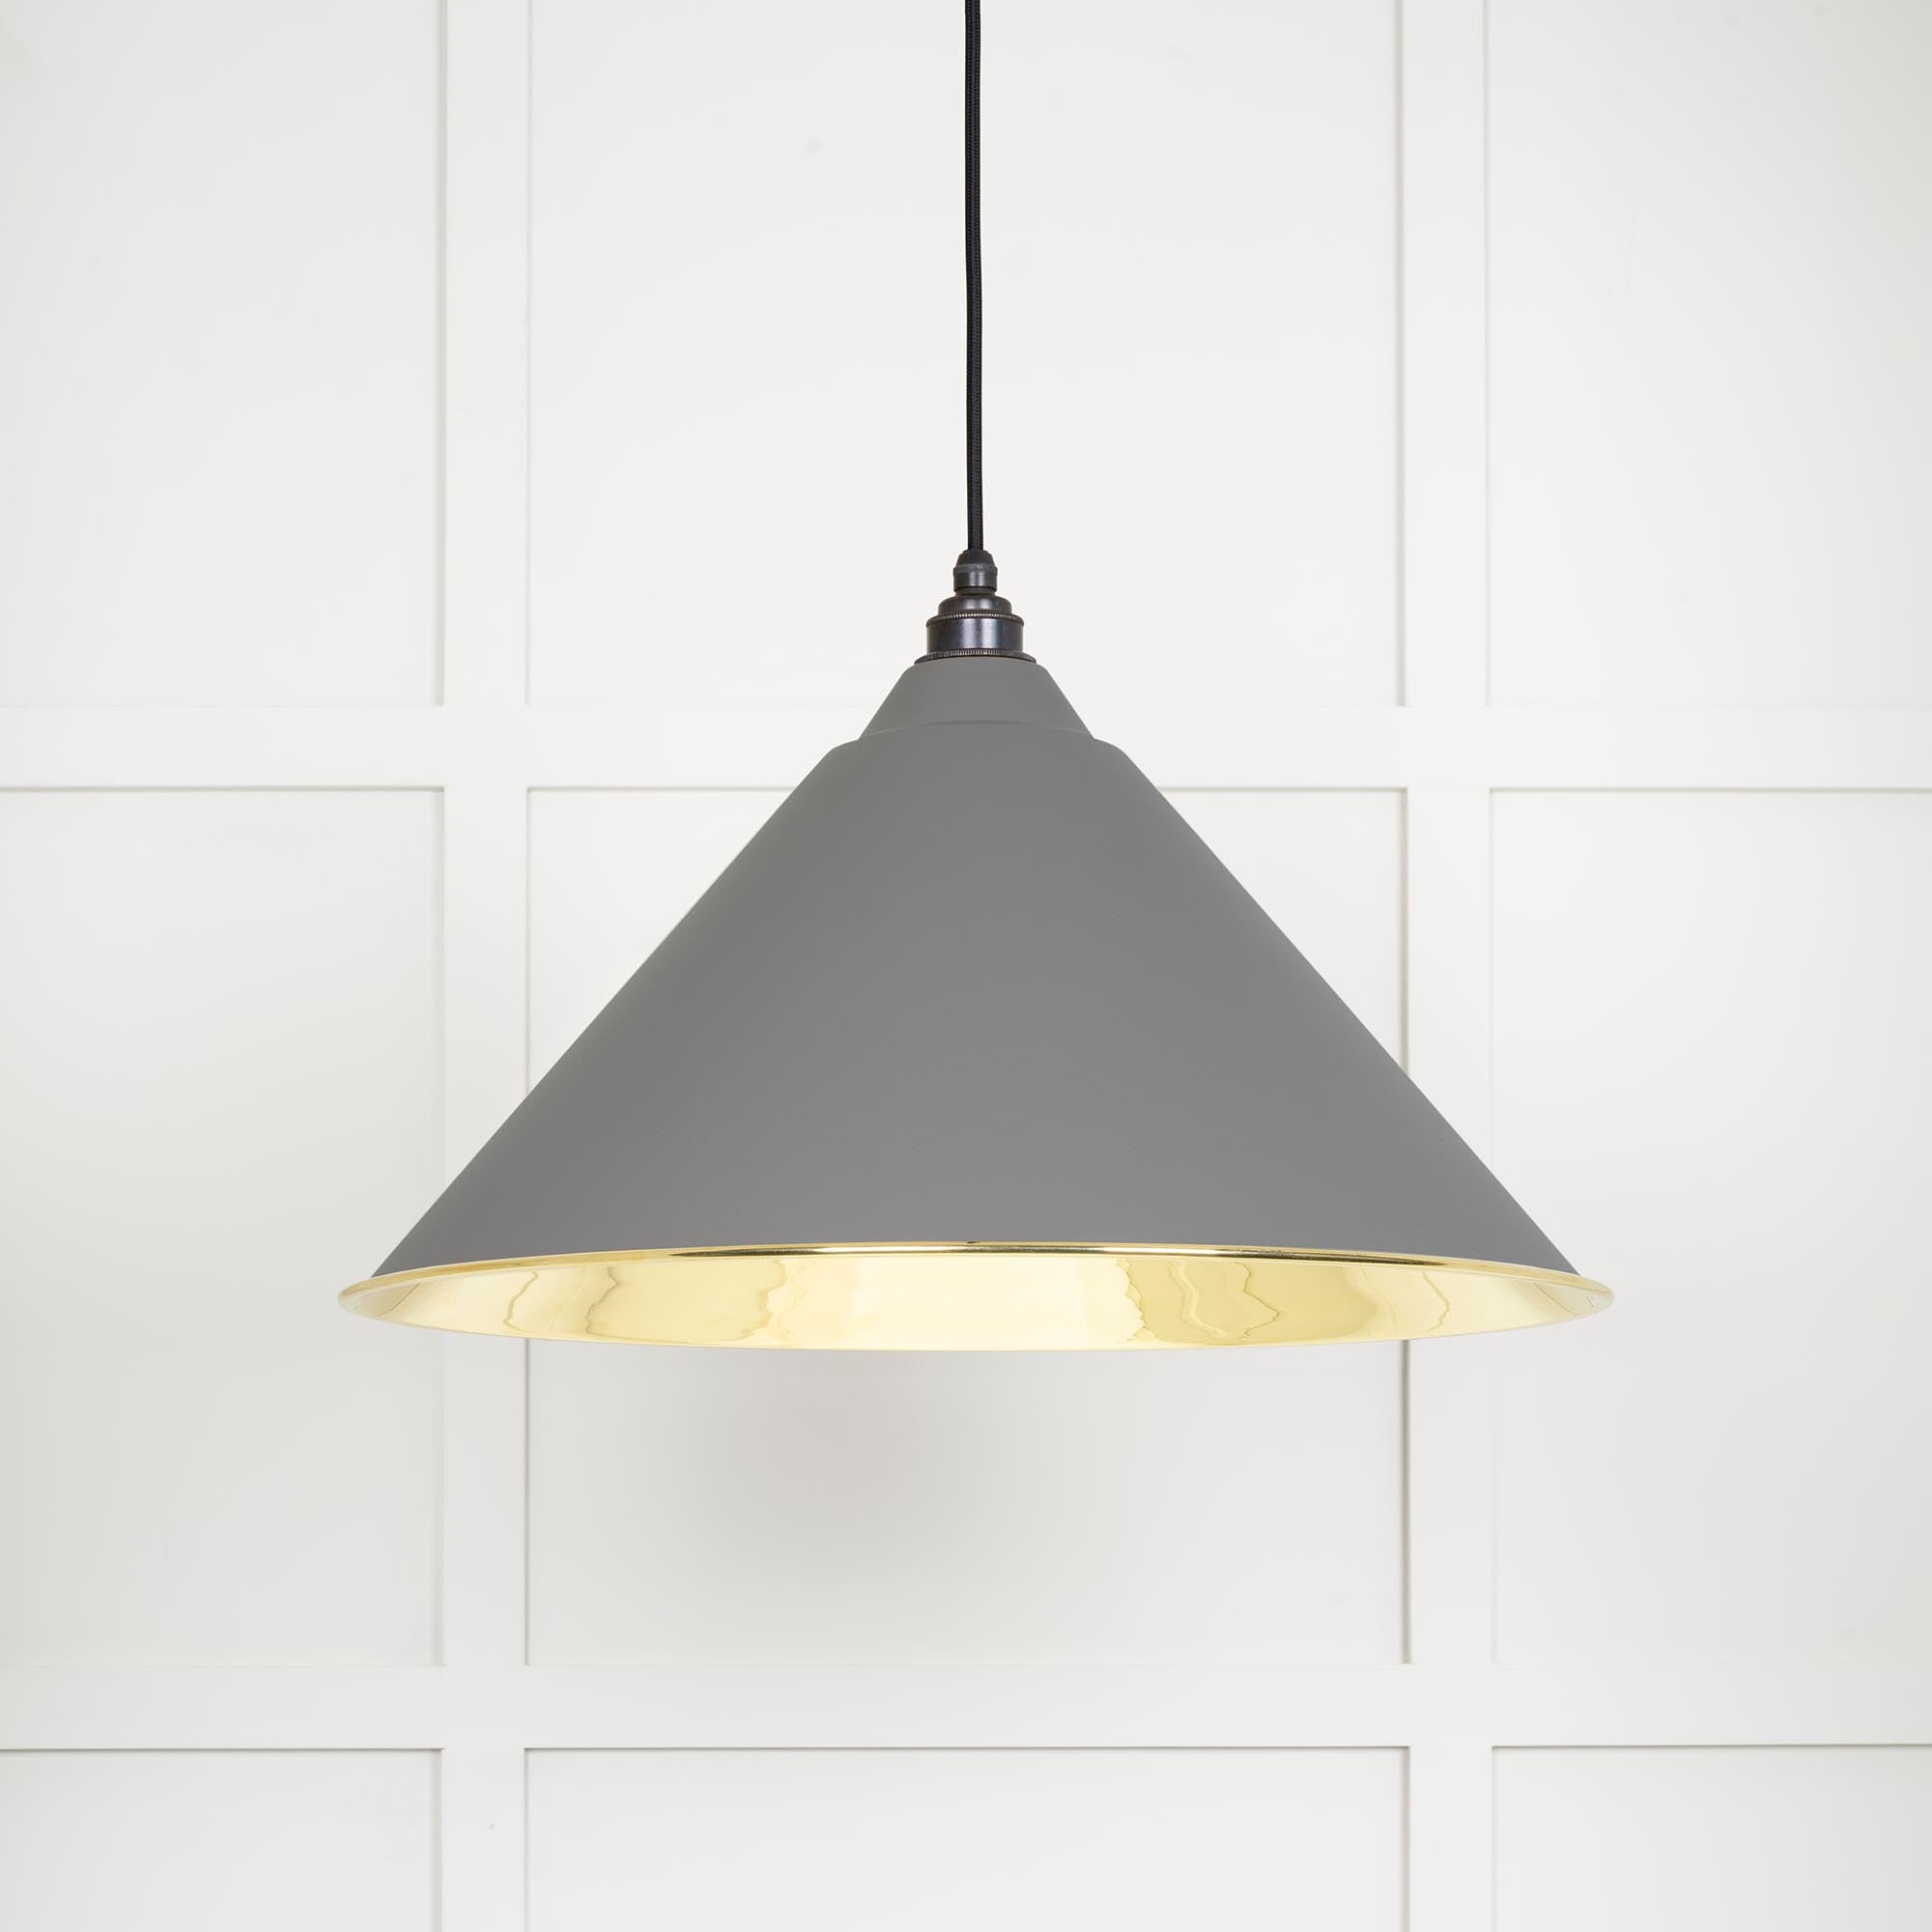 Image of Hockley Ceiling Light in Bluff